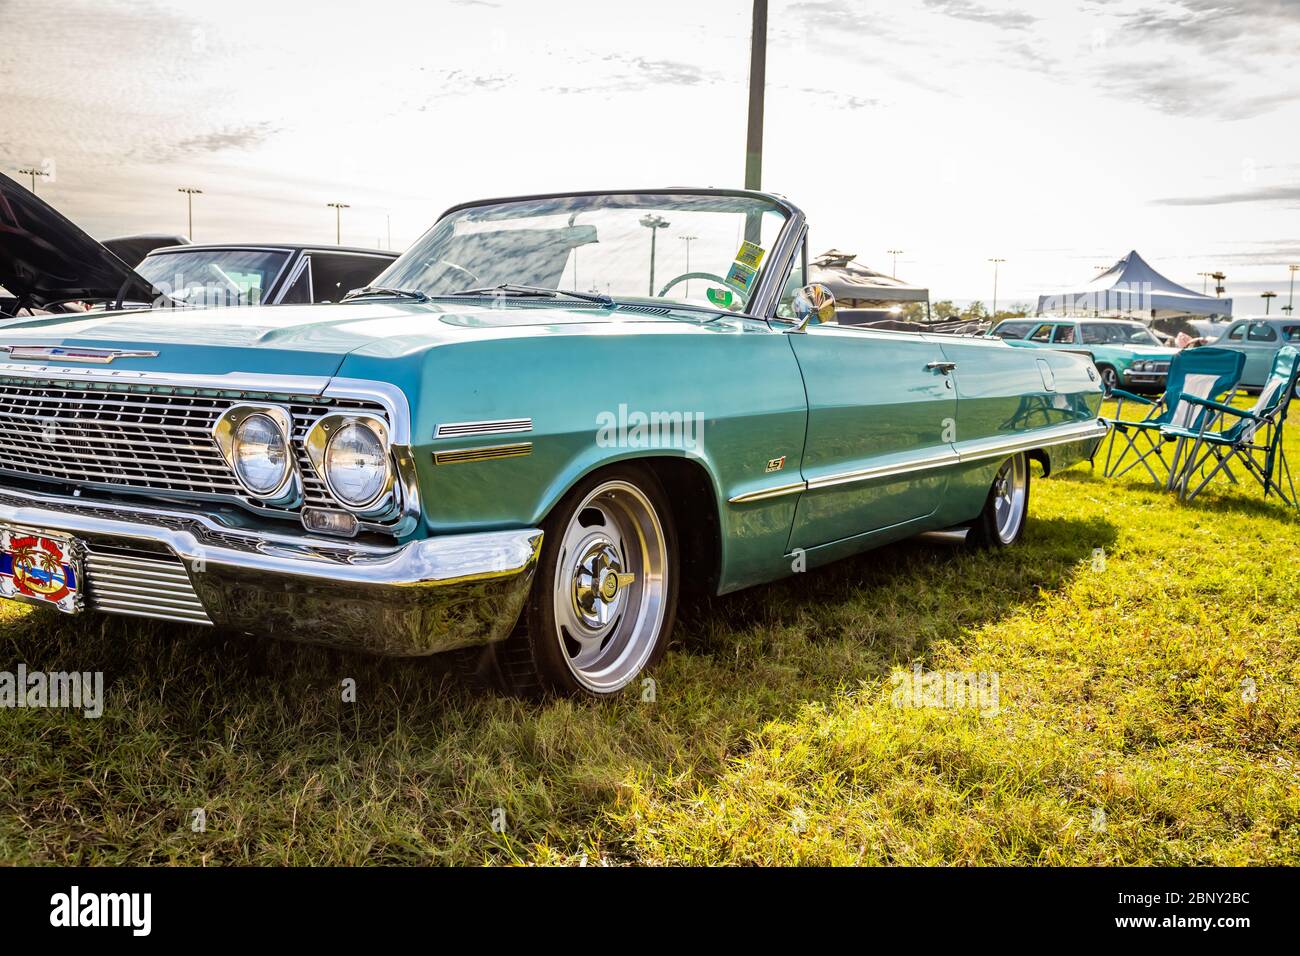 1963 Chevrolet Impala High Resolution Stock Photography And Images Alamy